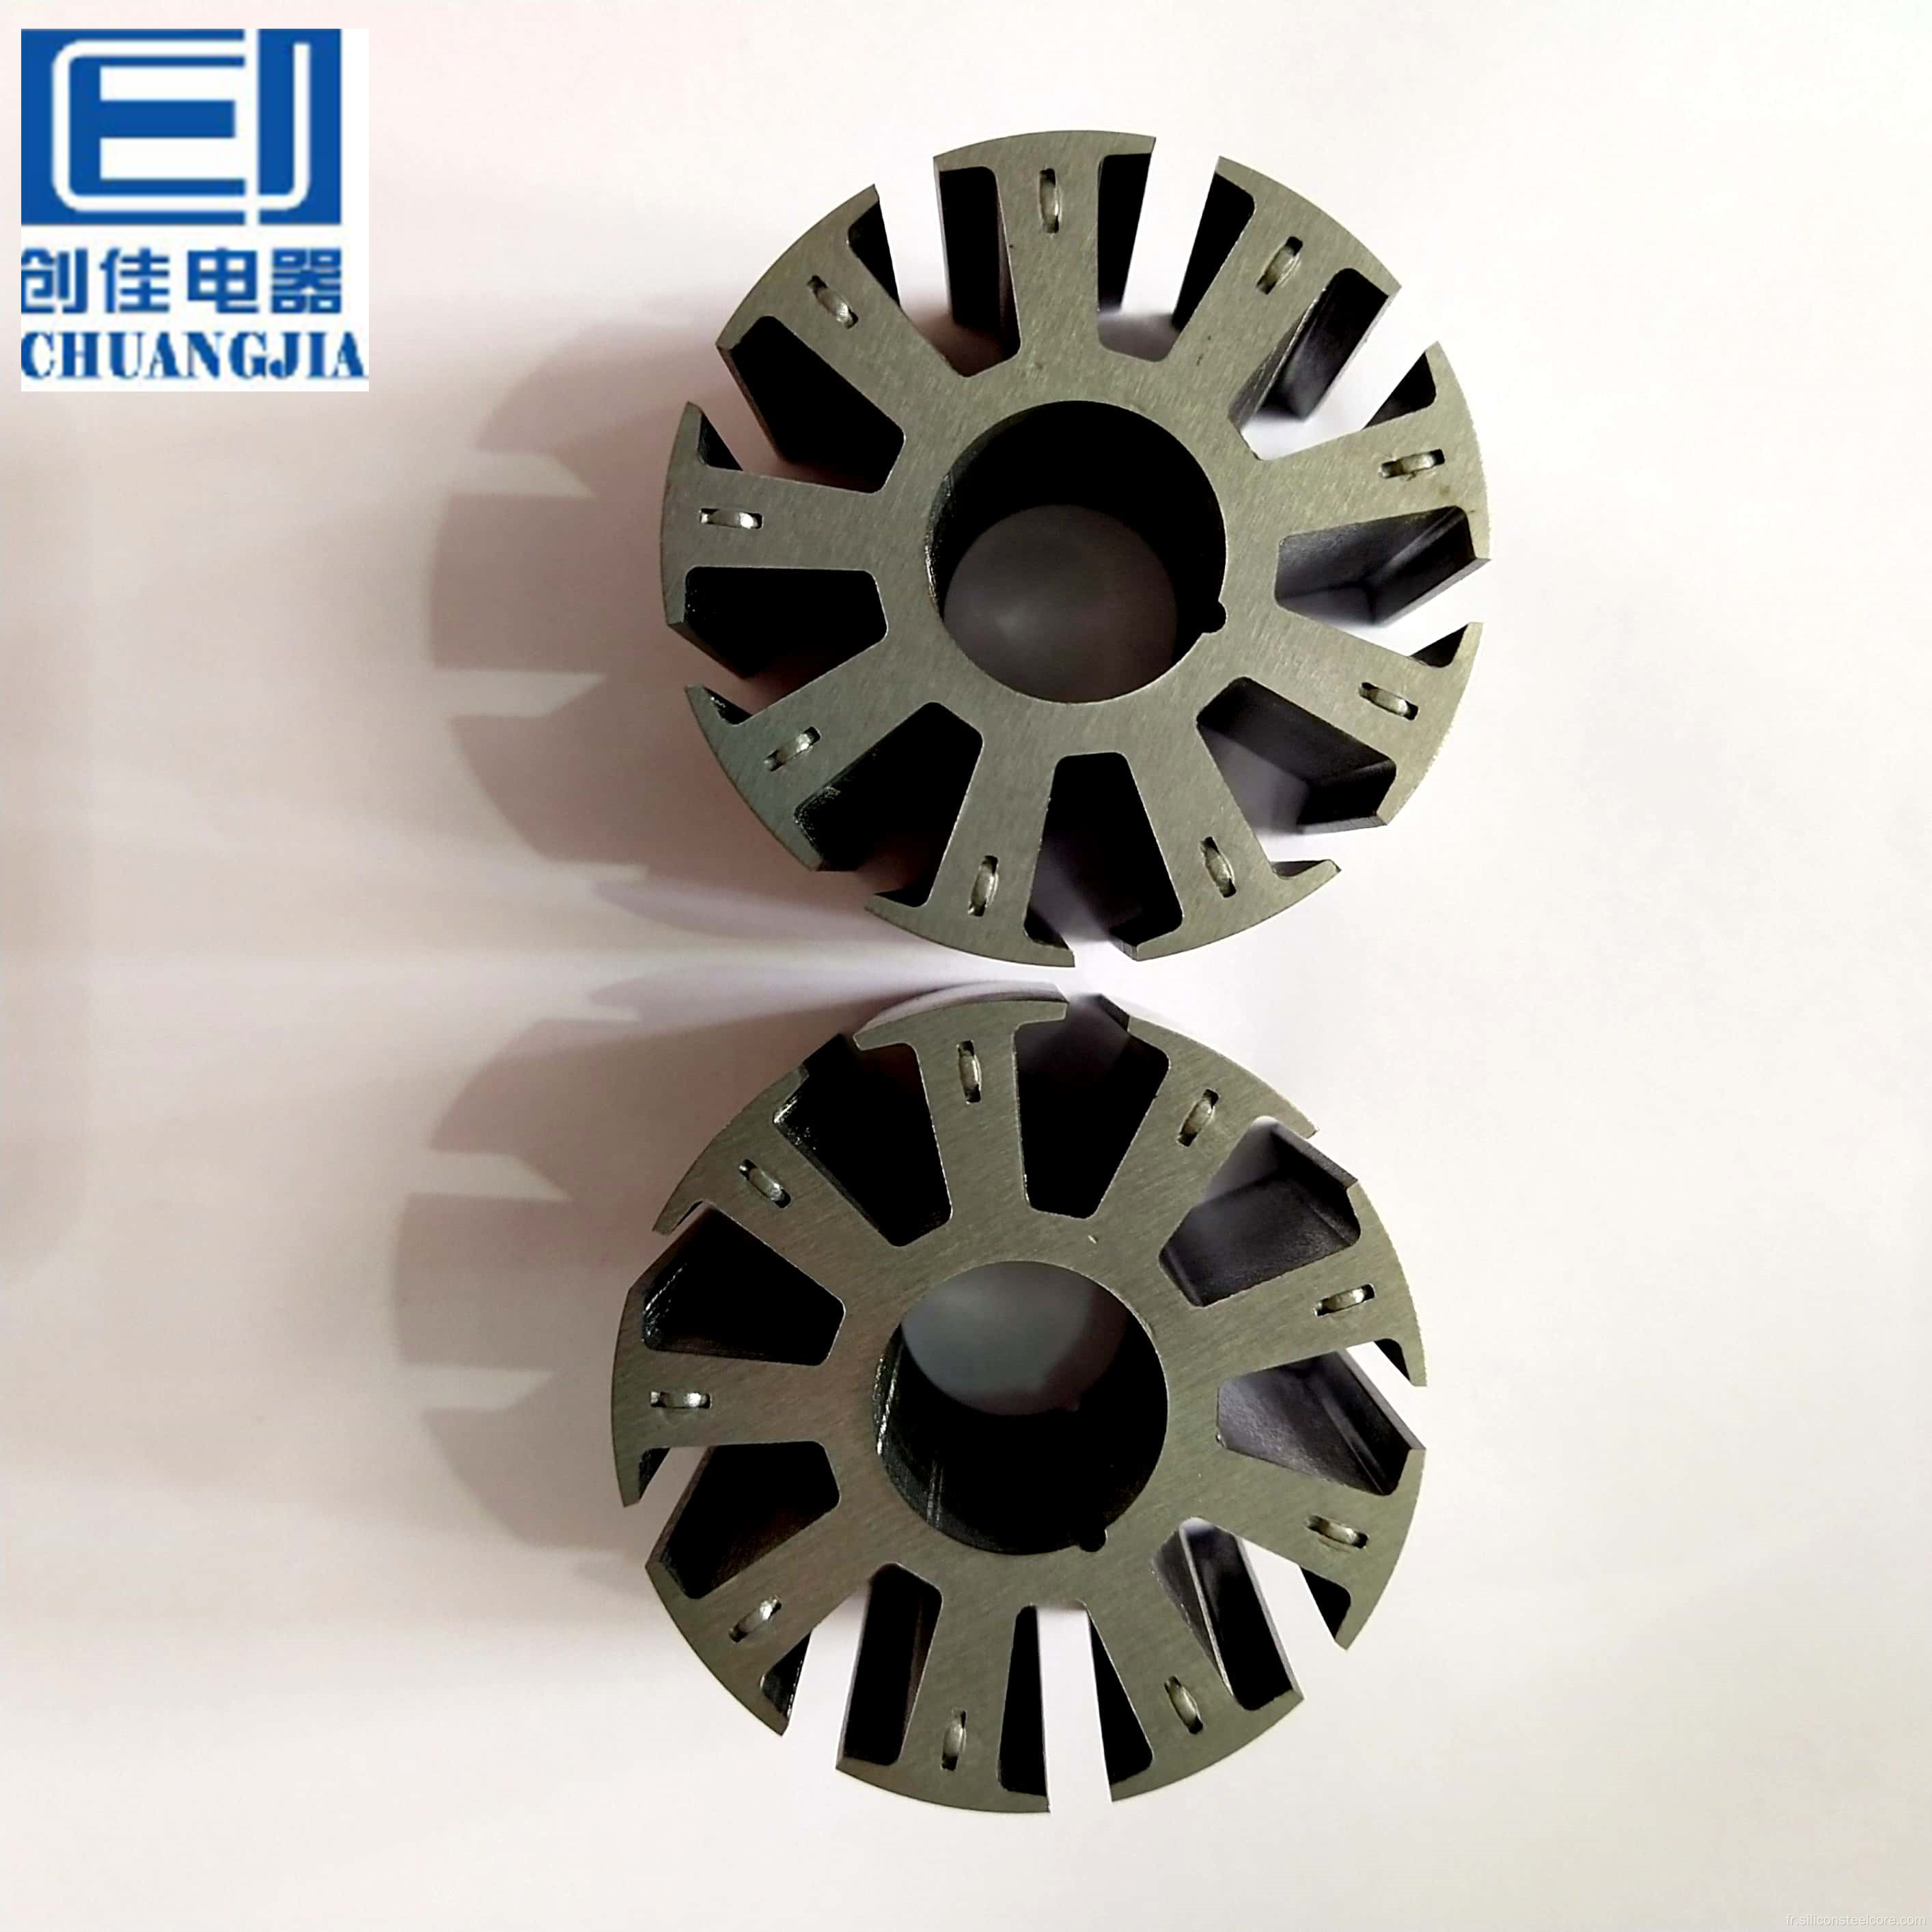 Chuangjia AC Motor Stator and Rotor Silicon Steel Sheet 50W 800 0,5 mm